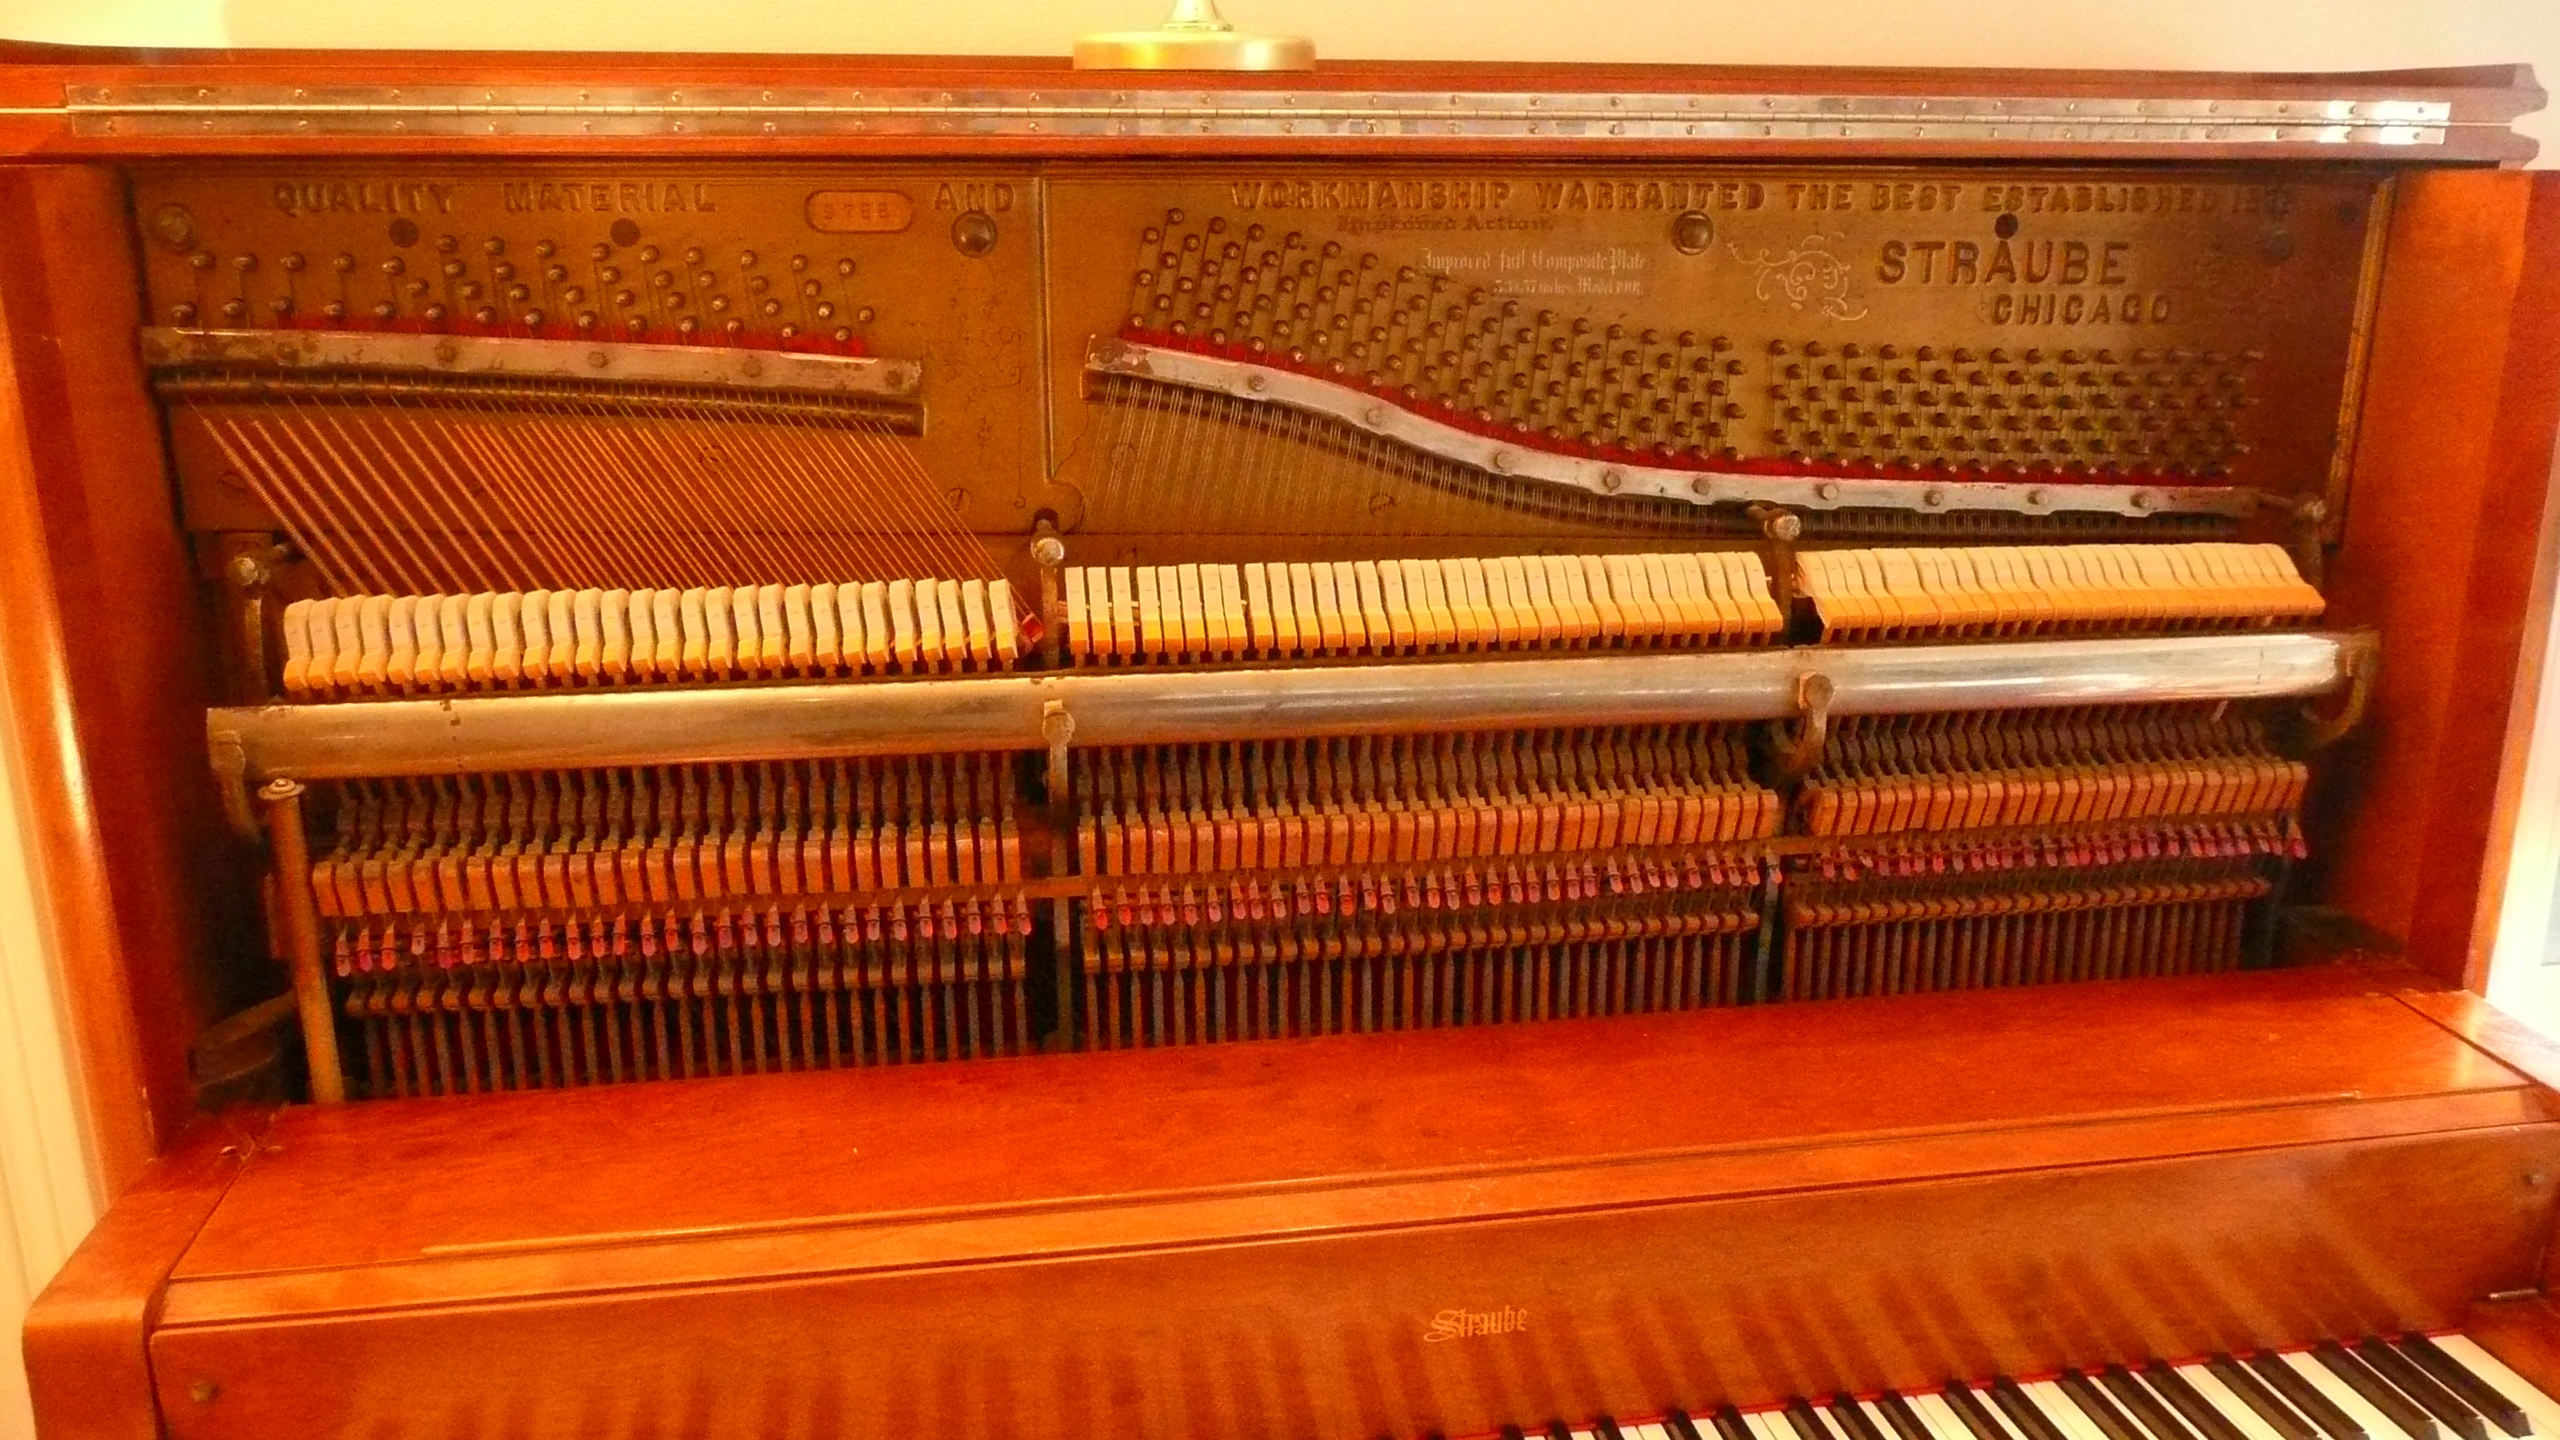 an old piano that looks like it could be a music instrument